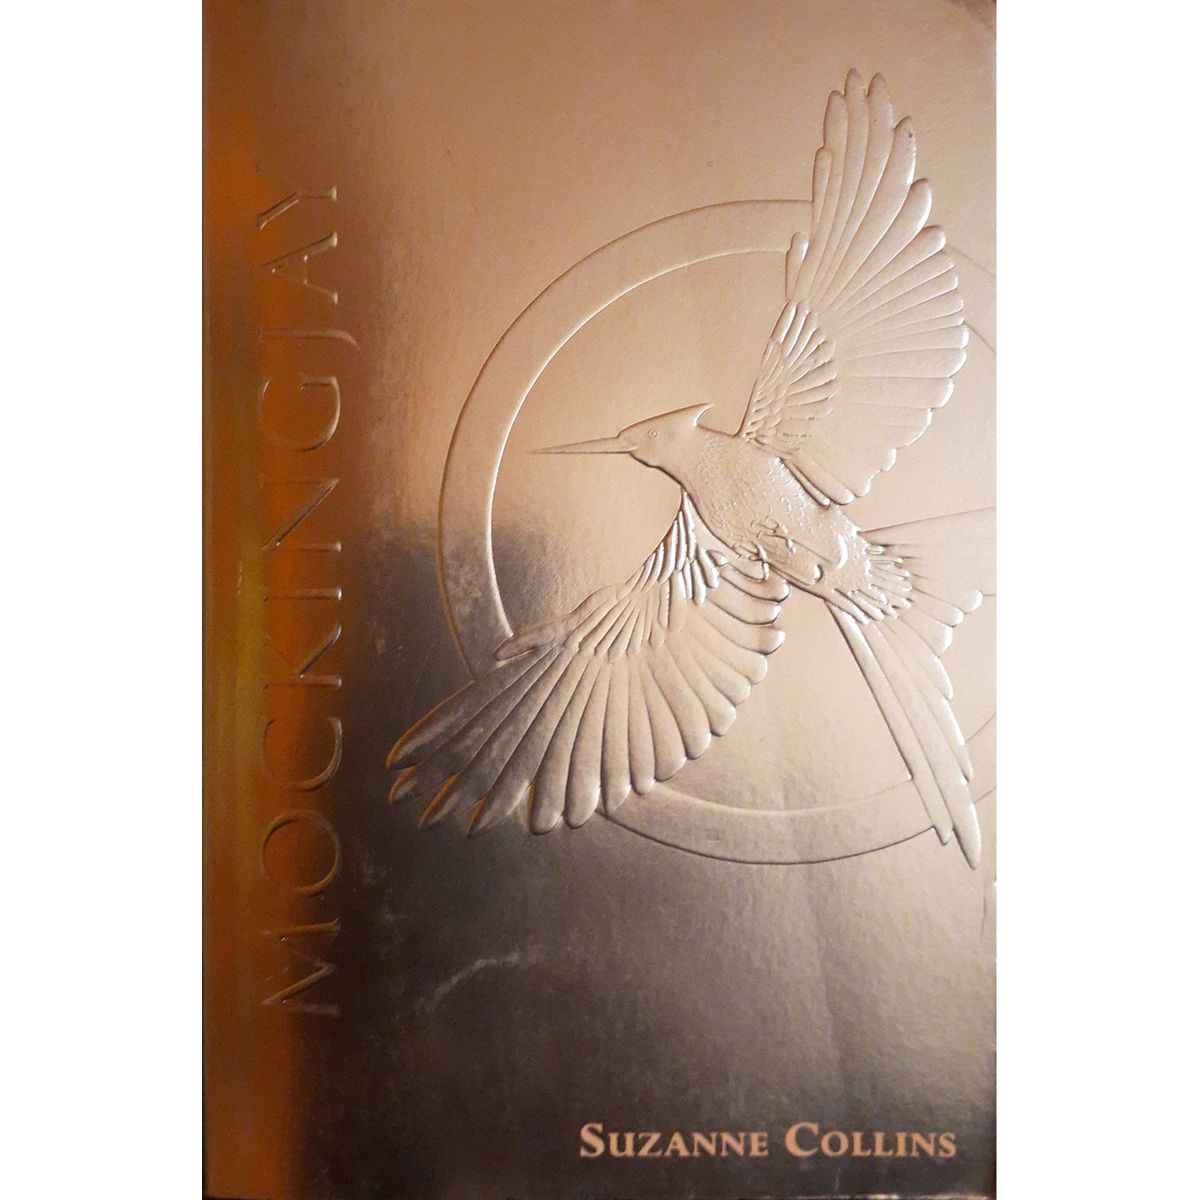 ISBN: 9781407139814 / 1407139819 - Mockingjay by Suzanne Collins [2013]